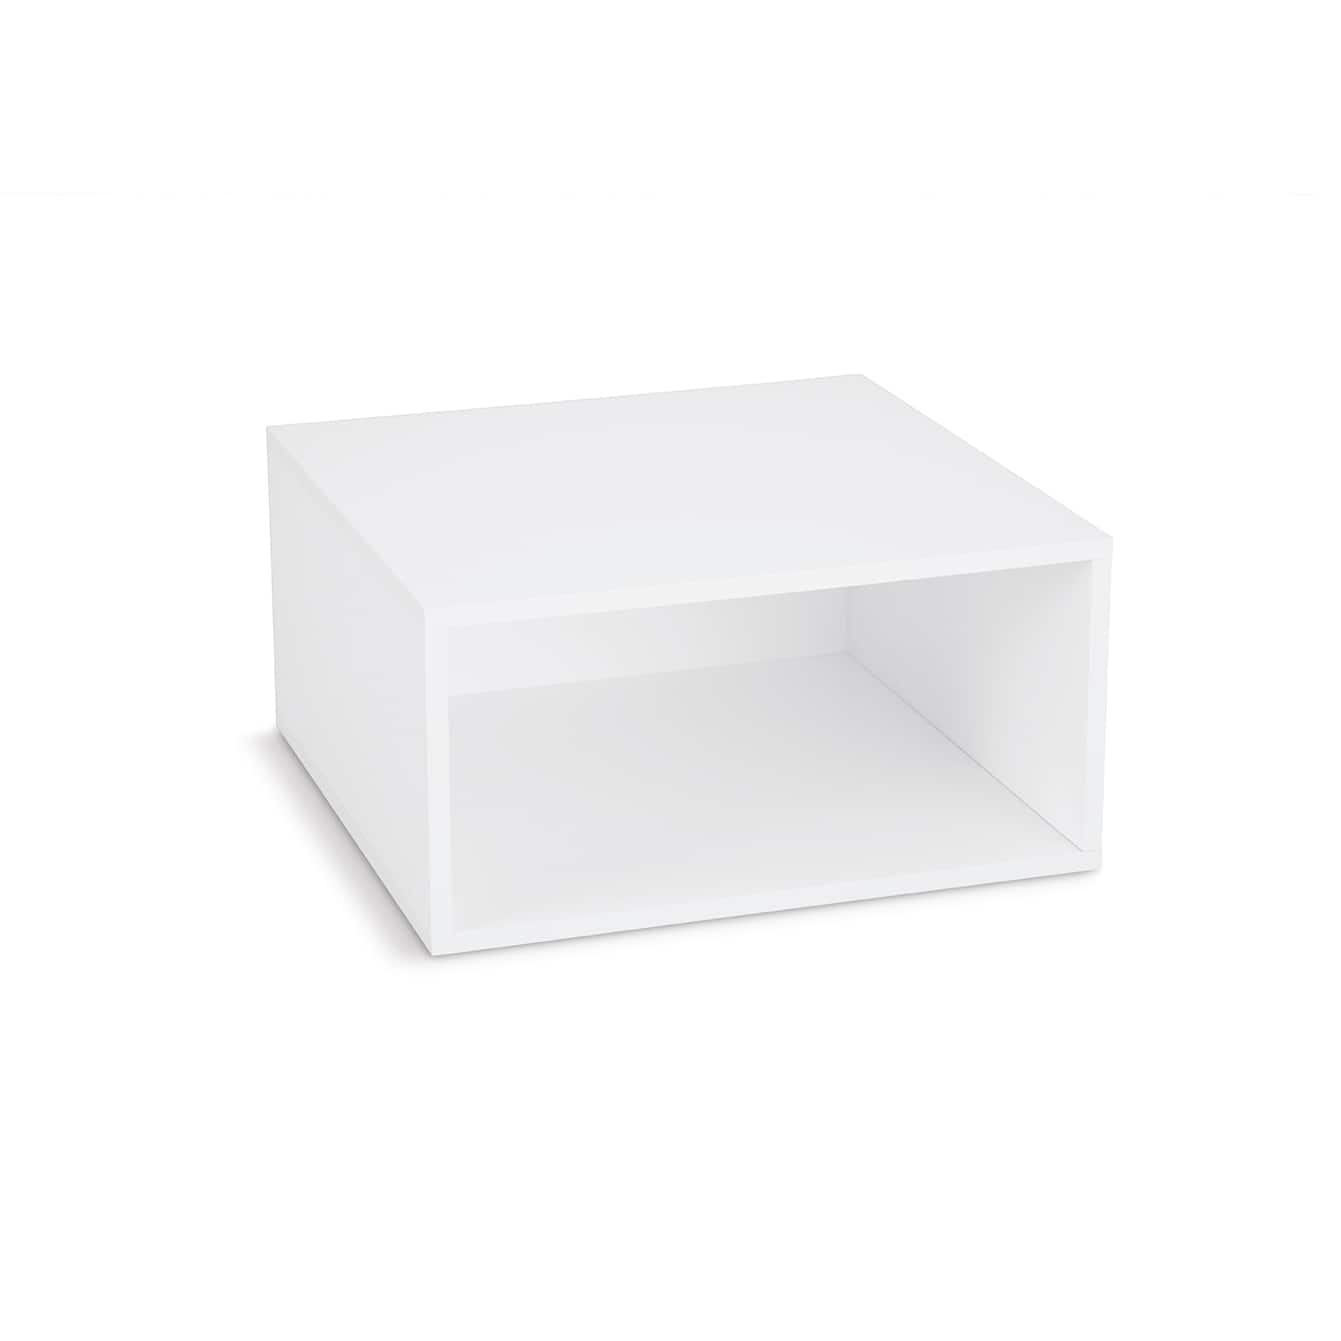 MICHAELS Modular 9 Cube Divider Insert by Simply Tidy™ 